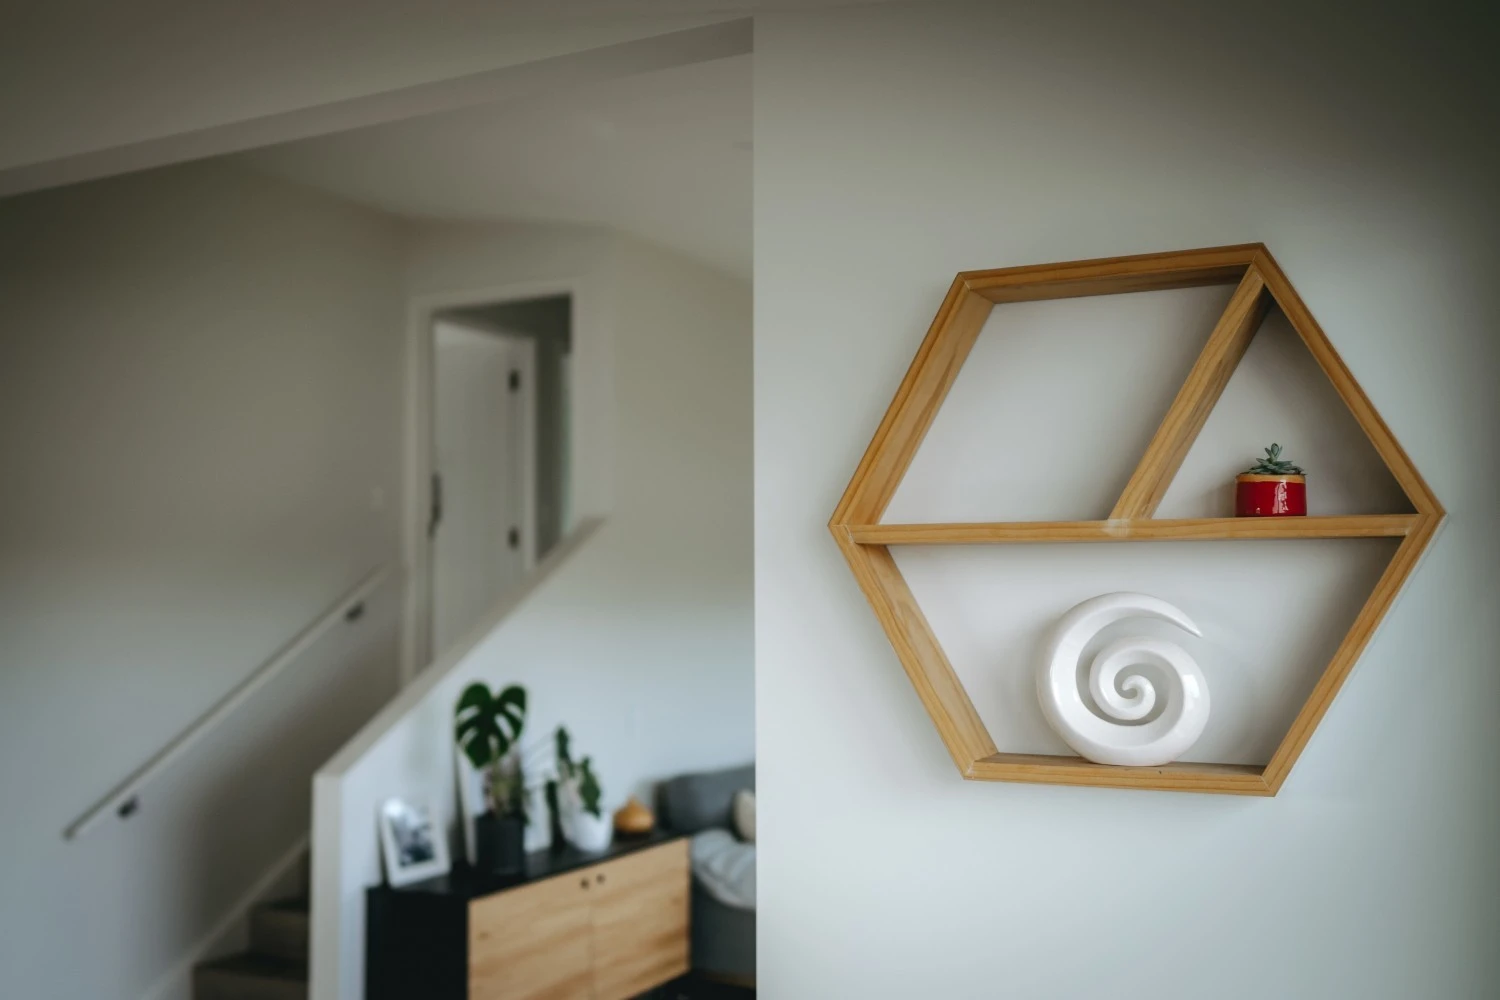 6 decor hacks suitable for your New Zealand rental